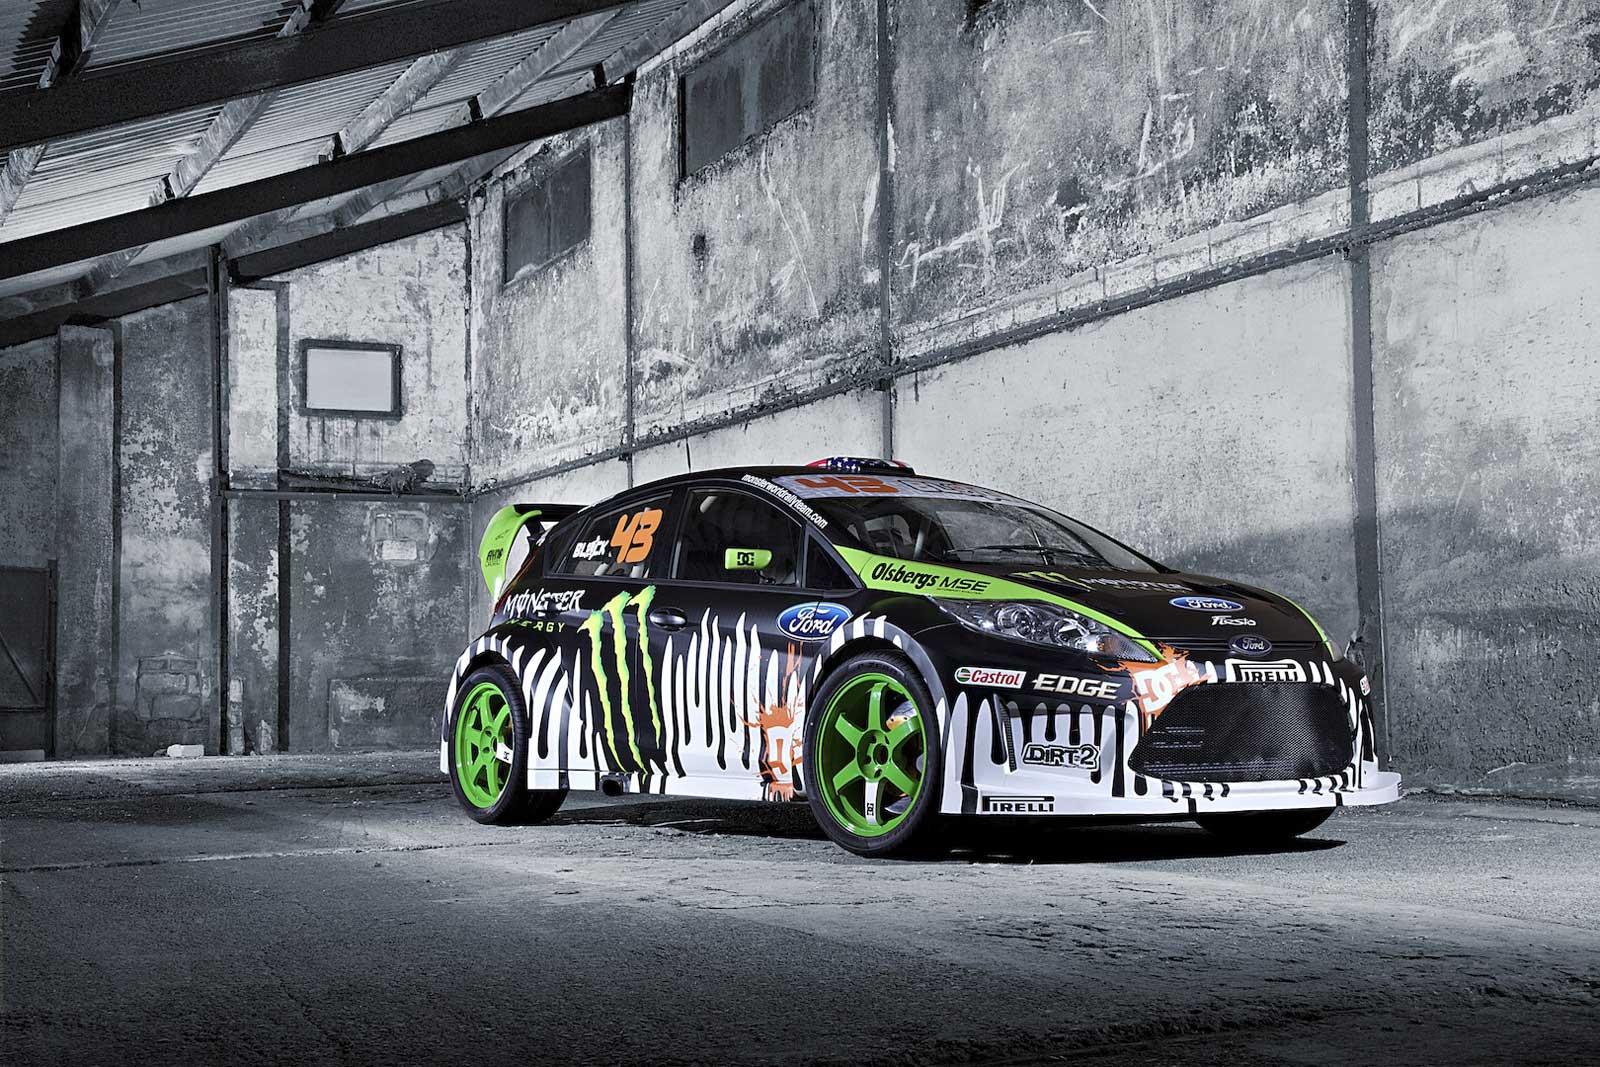 My The Dope Ford Fiesta Gymkhana Ken Block Edition And Covercar